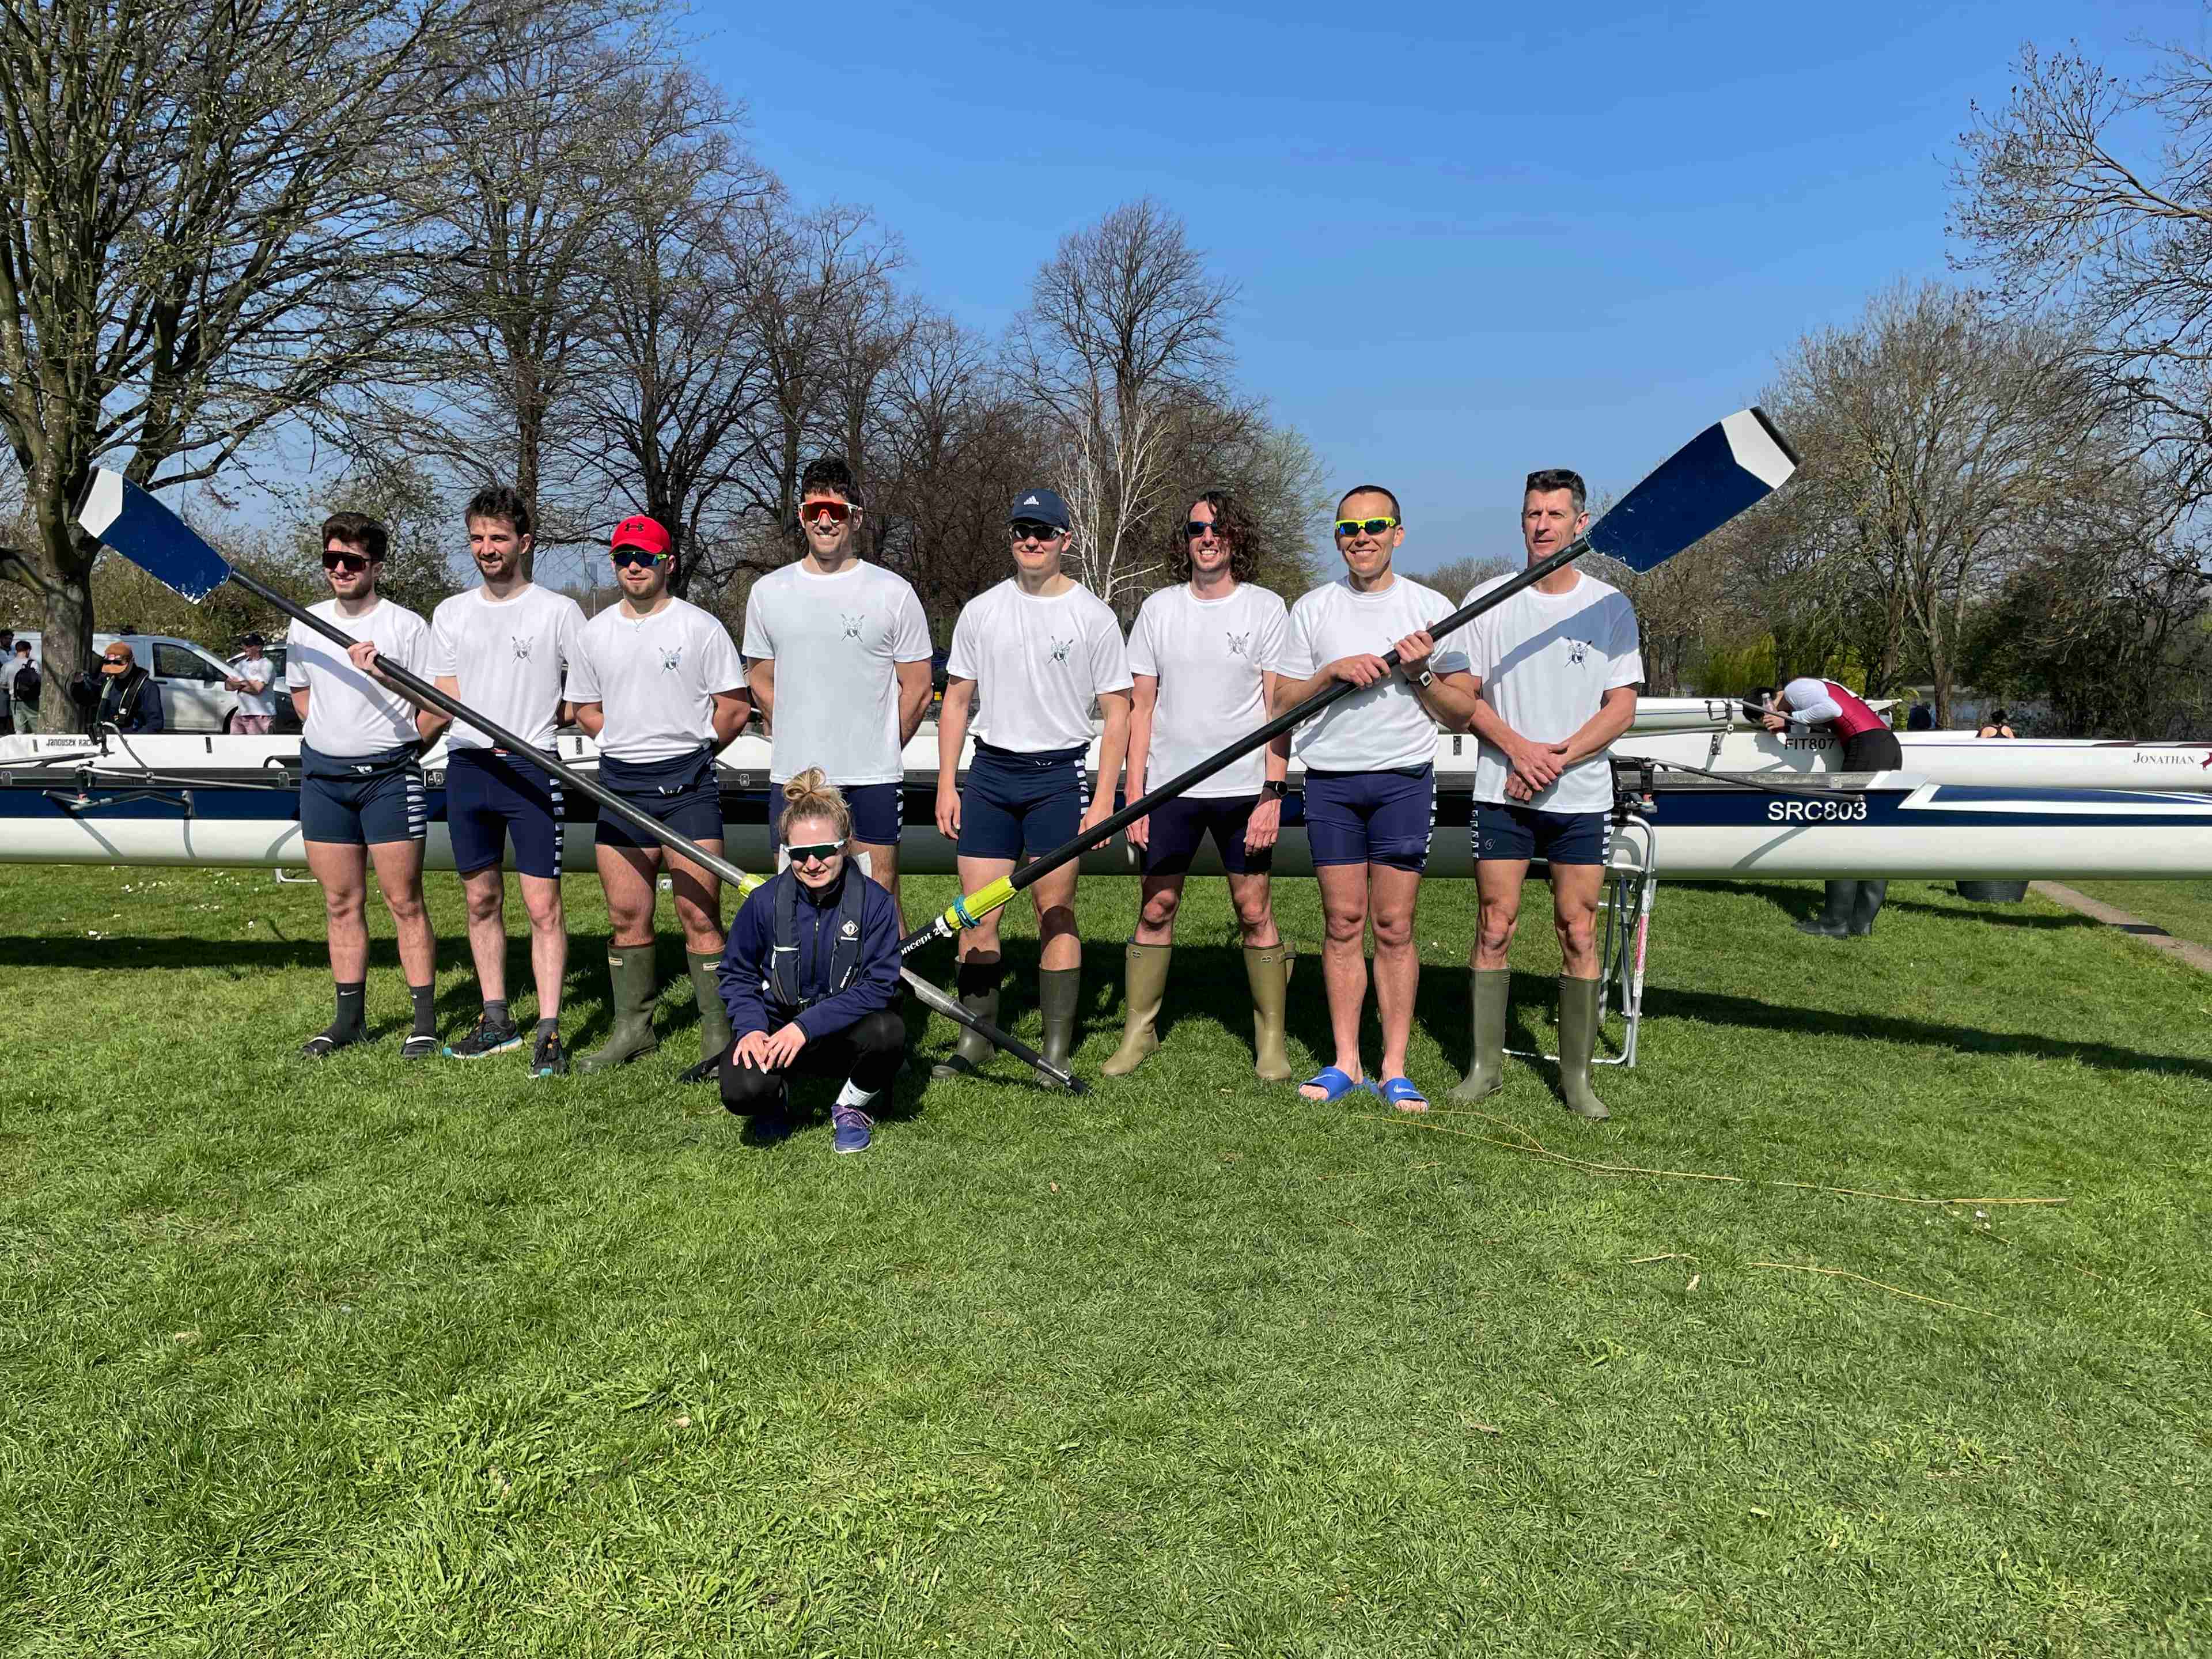 The Men’s HoRR poses on the bank.